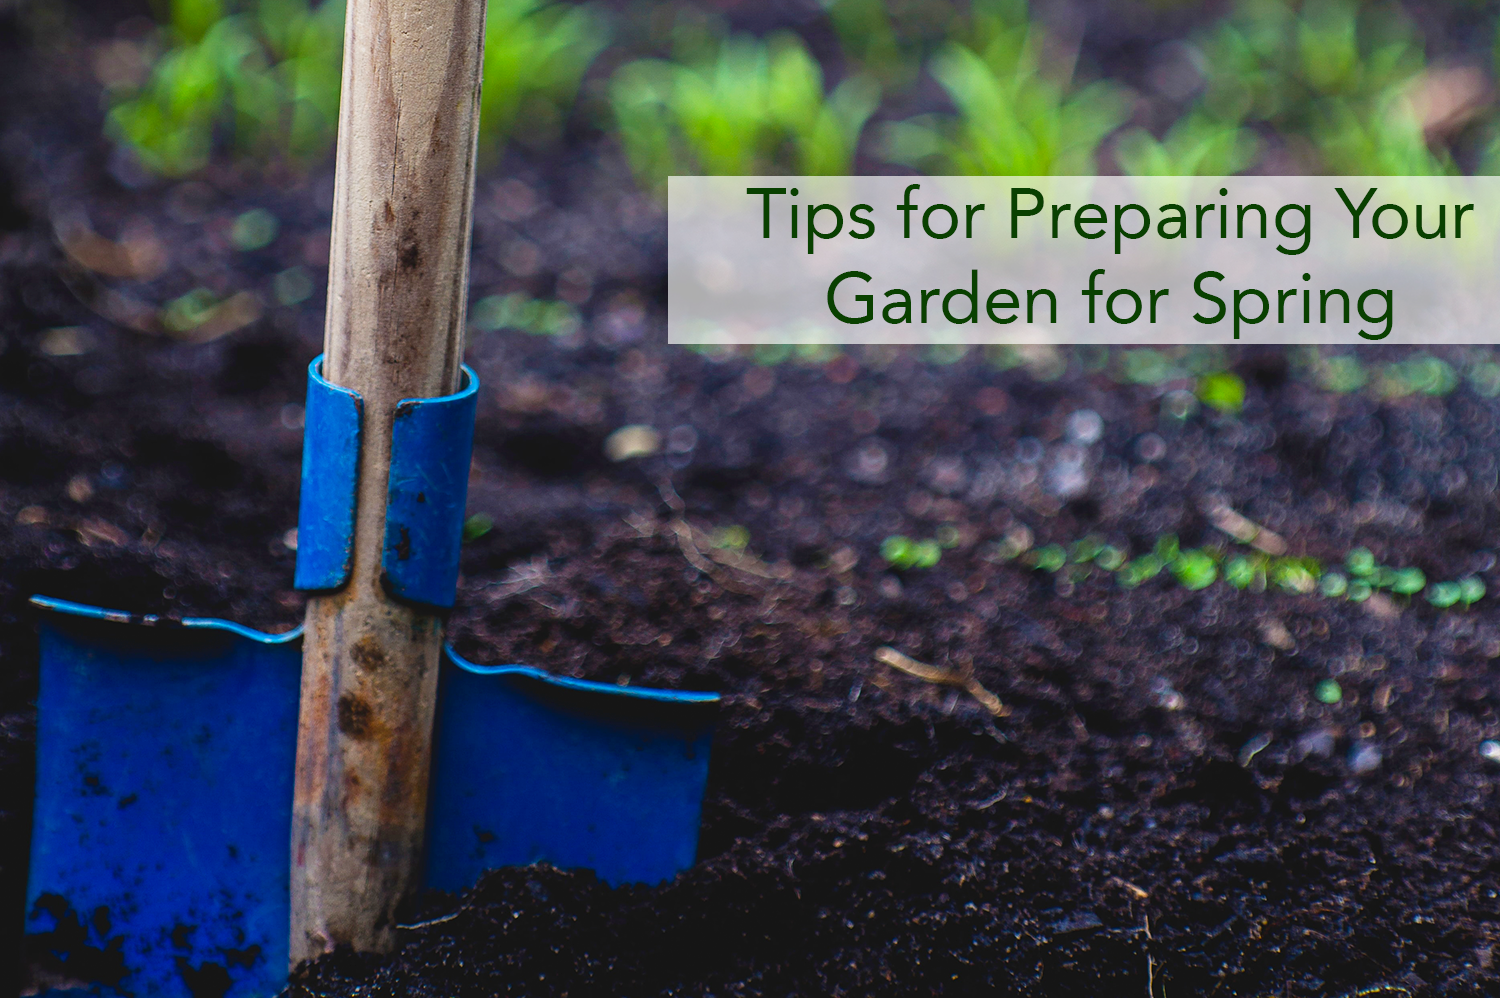 Preparing your garden for spring by loosening the soil.